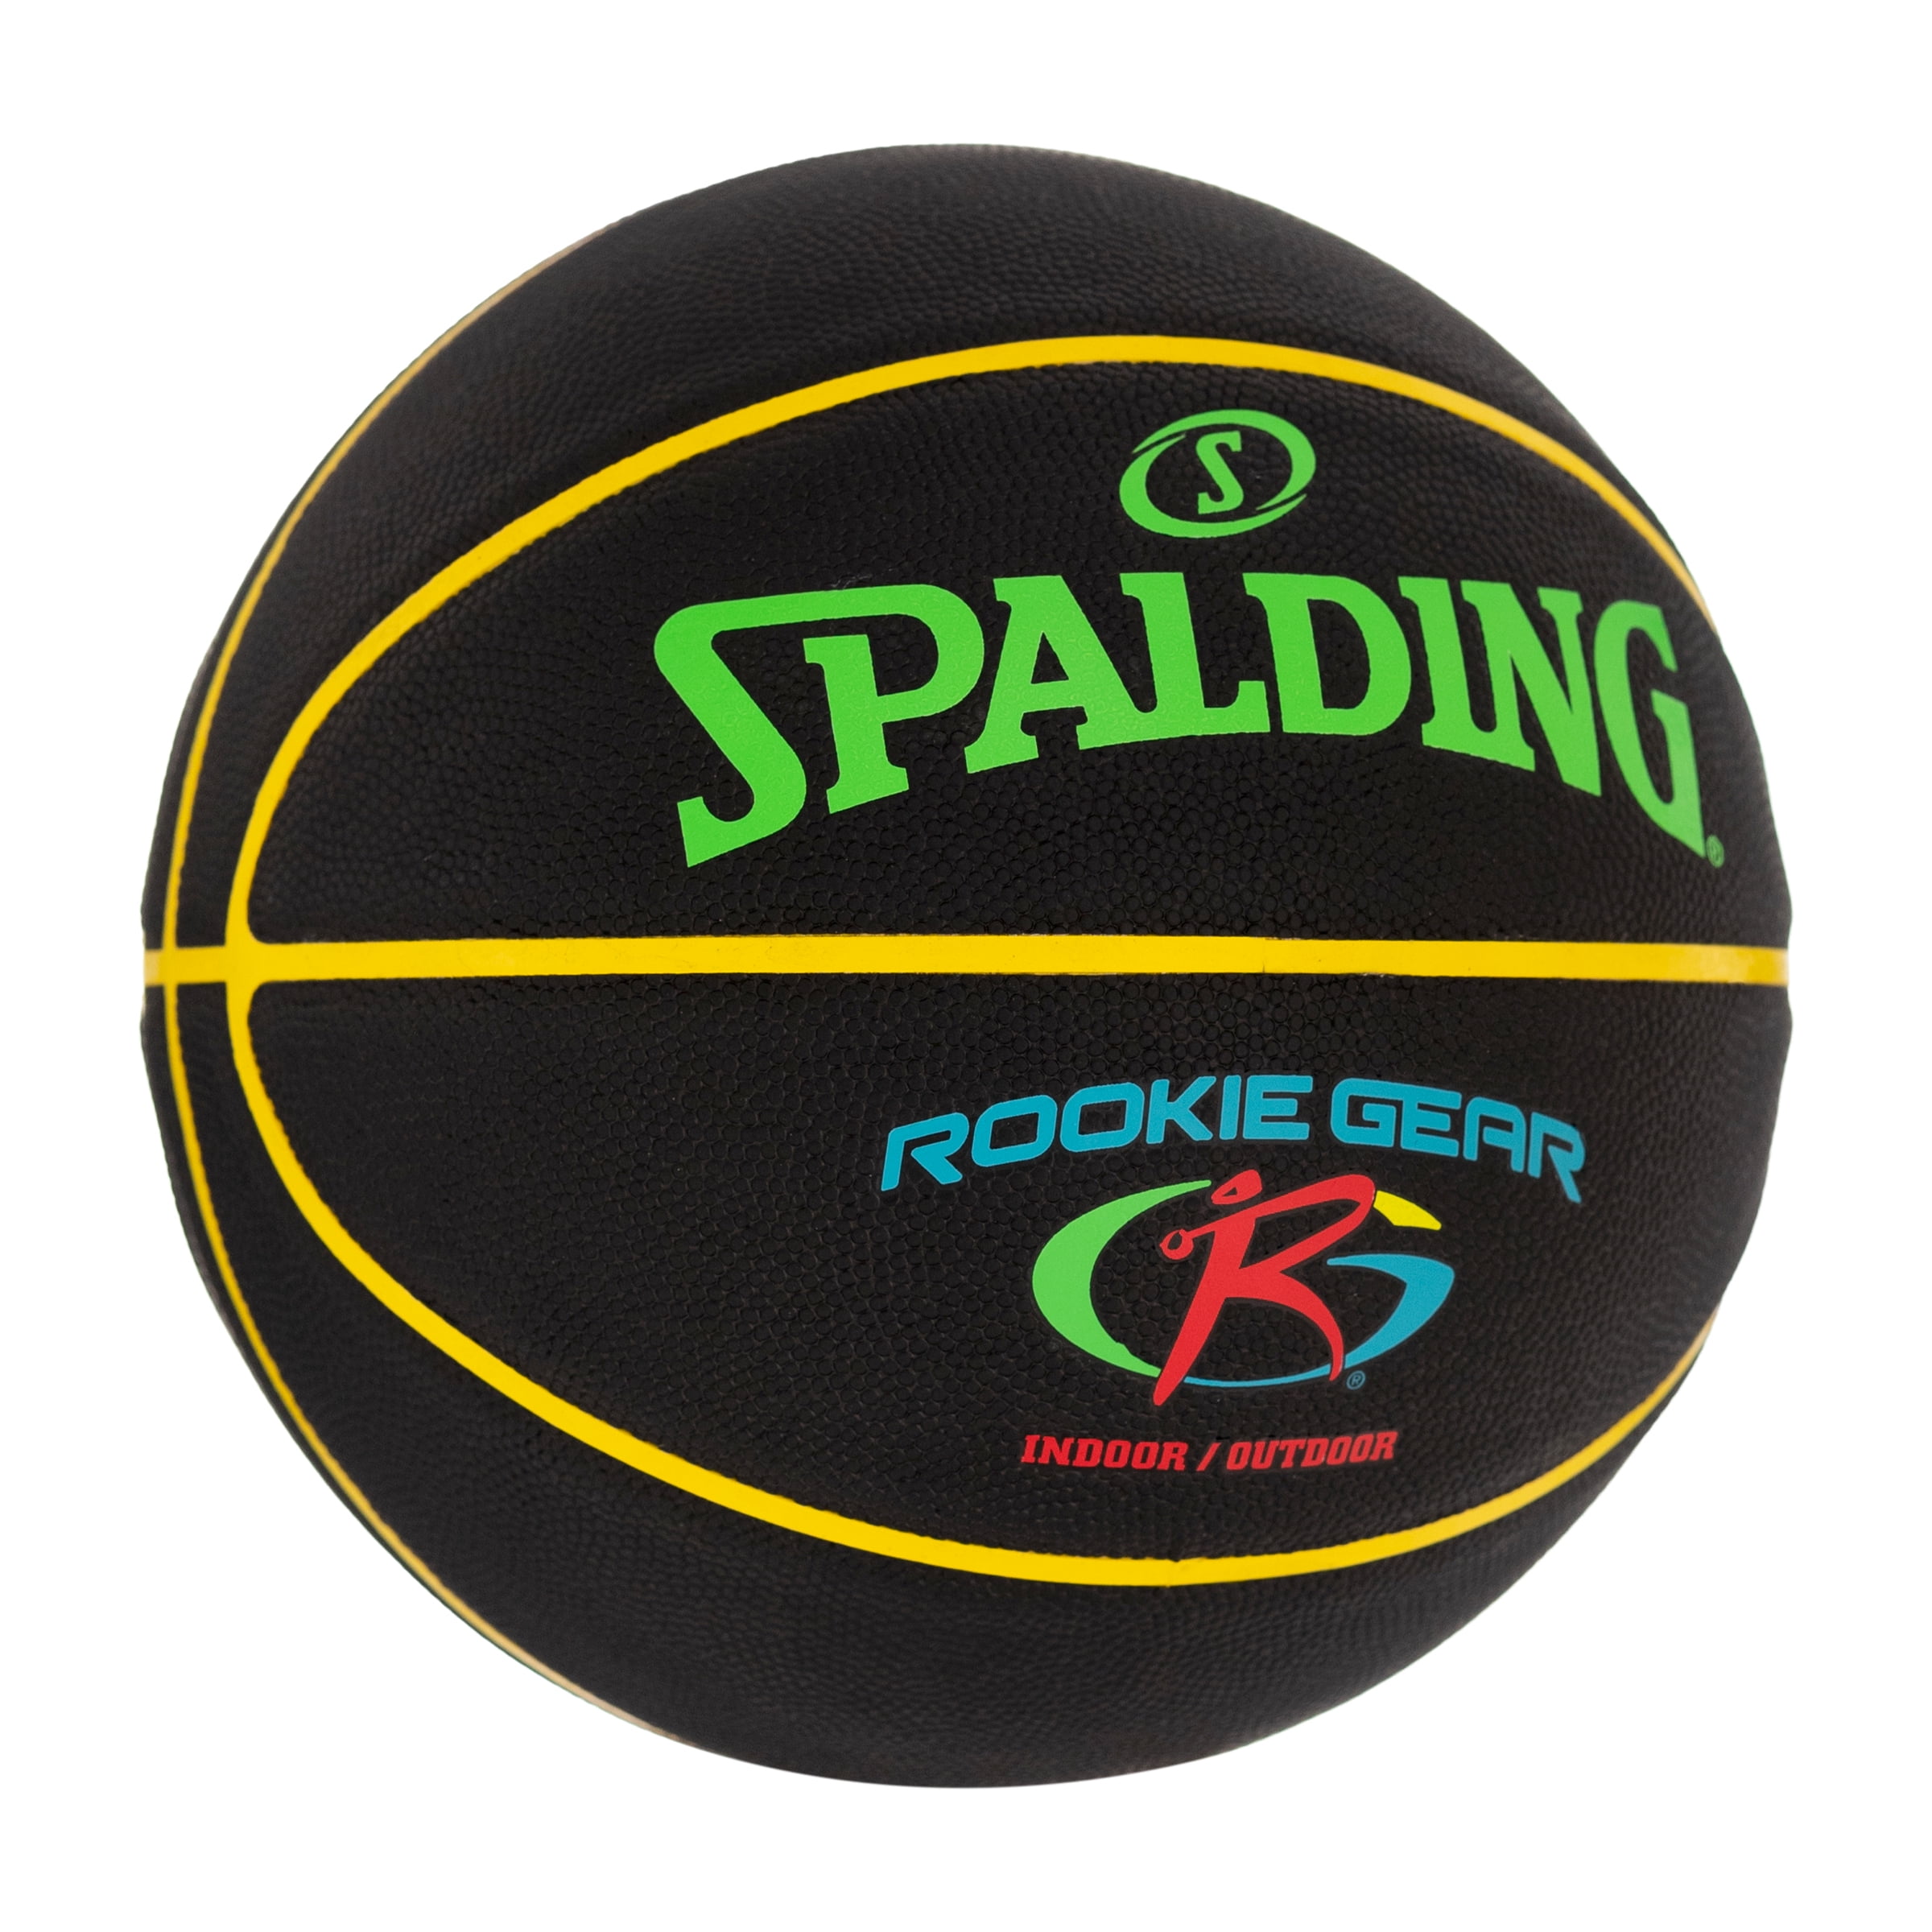 Spalding Rookie Gear Youth Indoor-Outdoor Basketball 